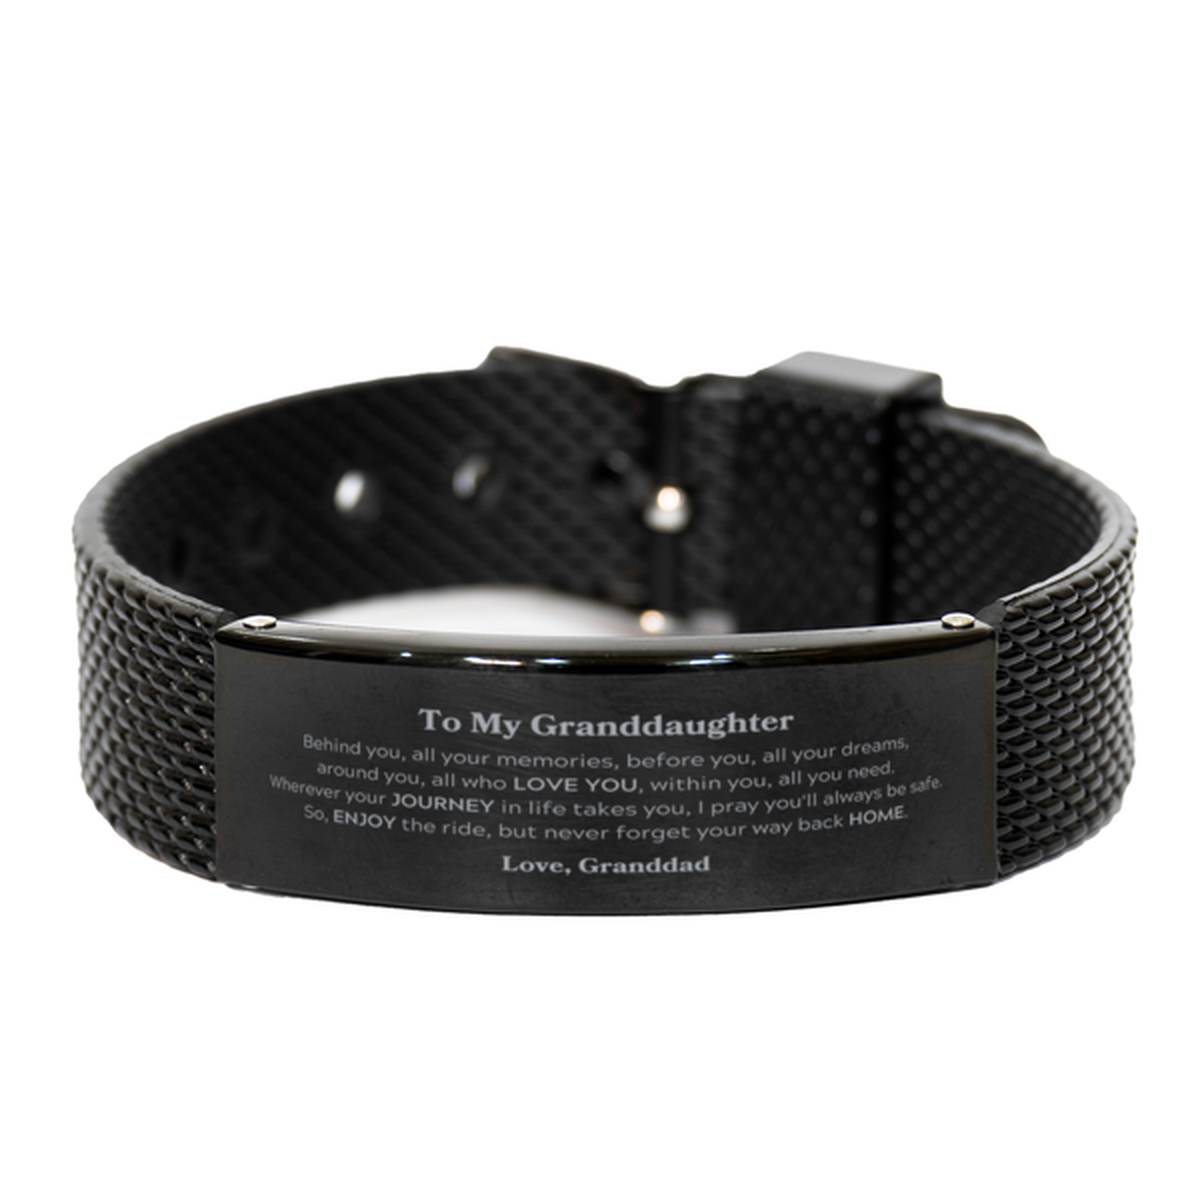 To My Granddaughter Graduation Gifts from Granddad, Granddaughter Black Shark Mesh Bracelet Christmas Birthday Gifts for Granddaughter Behind you, all your memories, before you, all your dreams. Love, Granddad